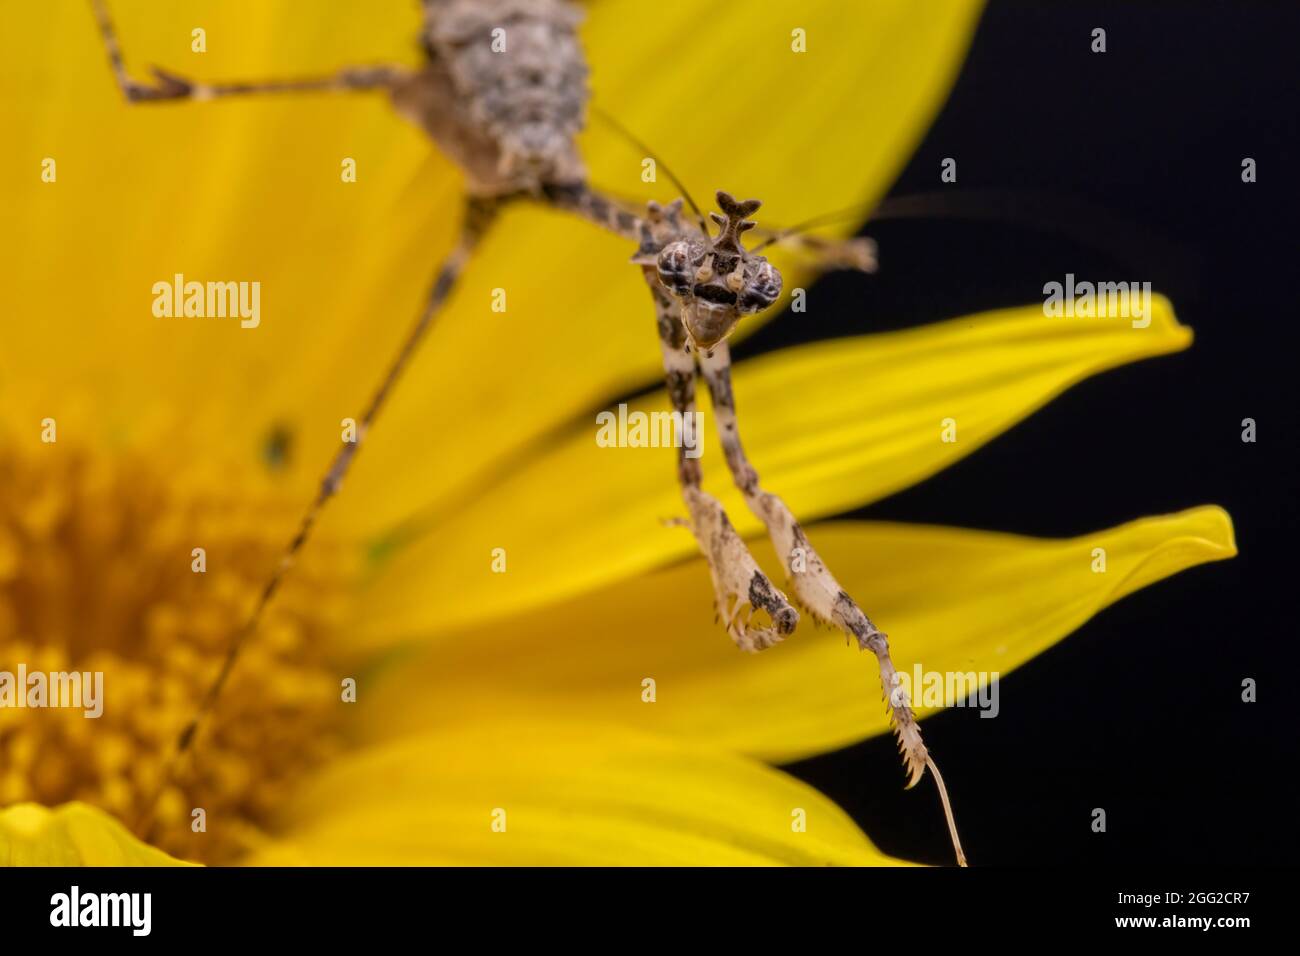 A close up macro photograph of a Cryptic Praying Mantis crawling across the petals of a yellow flower, with a black backdrop. Stock Photo